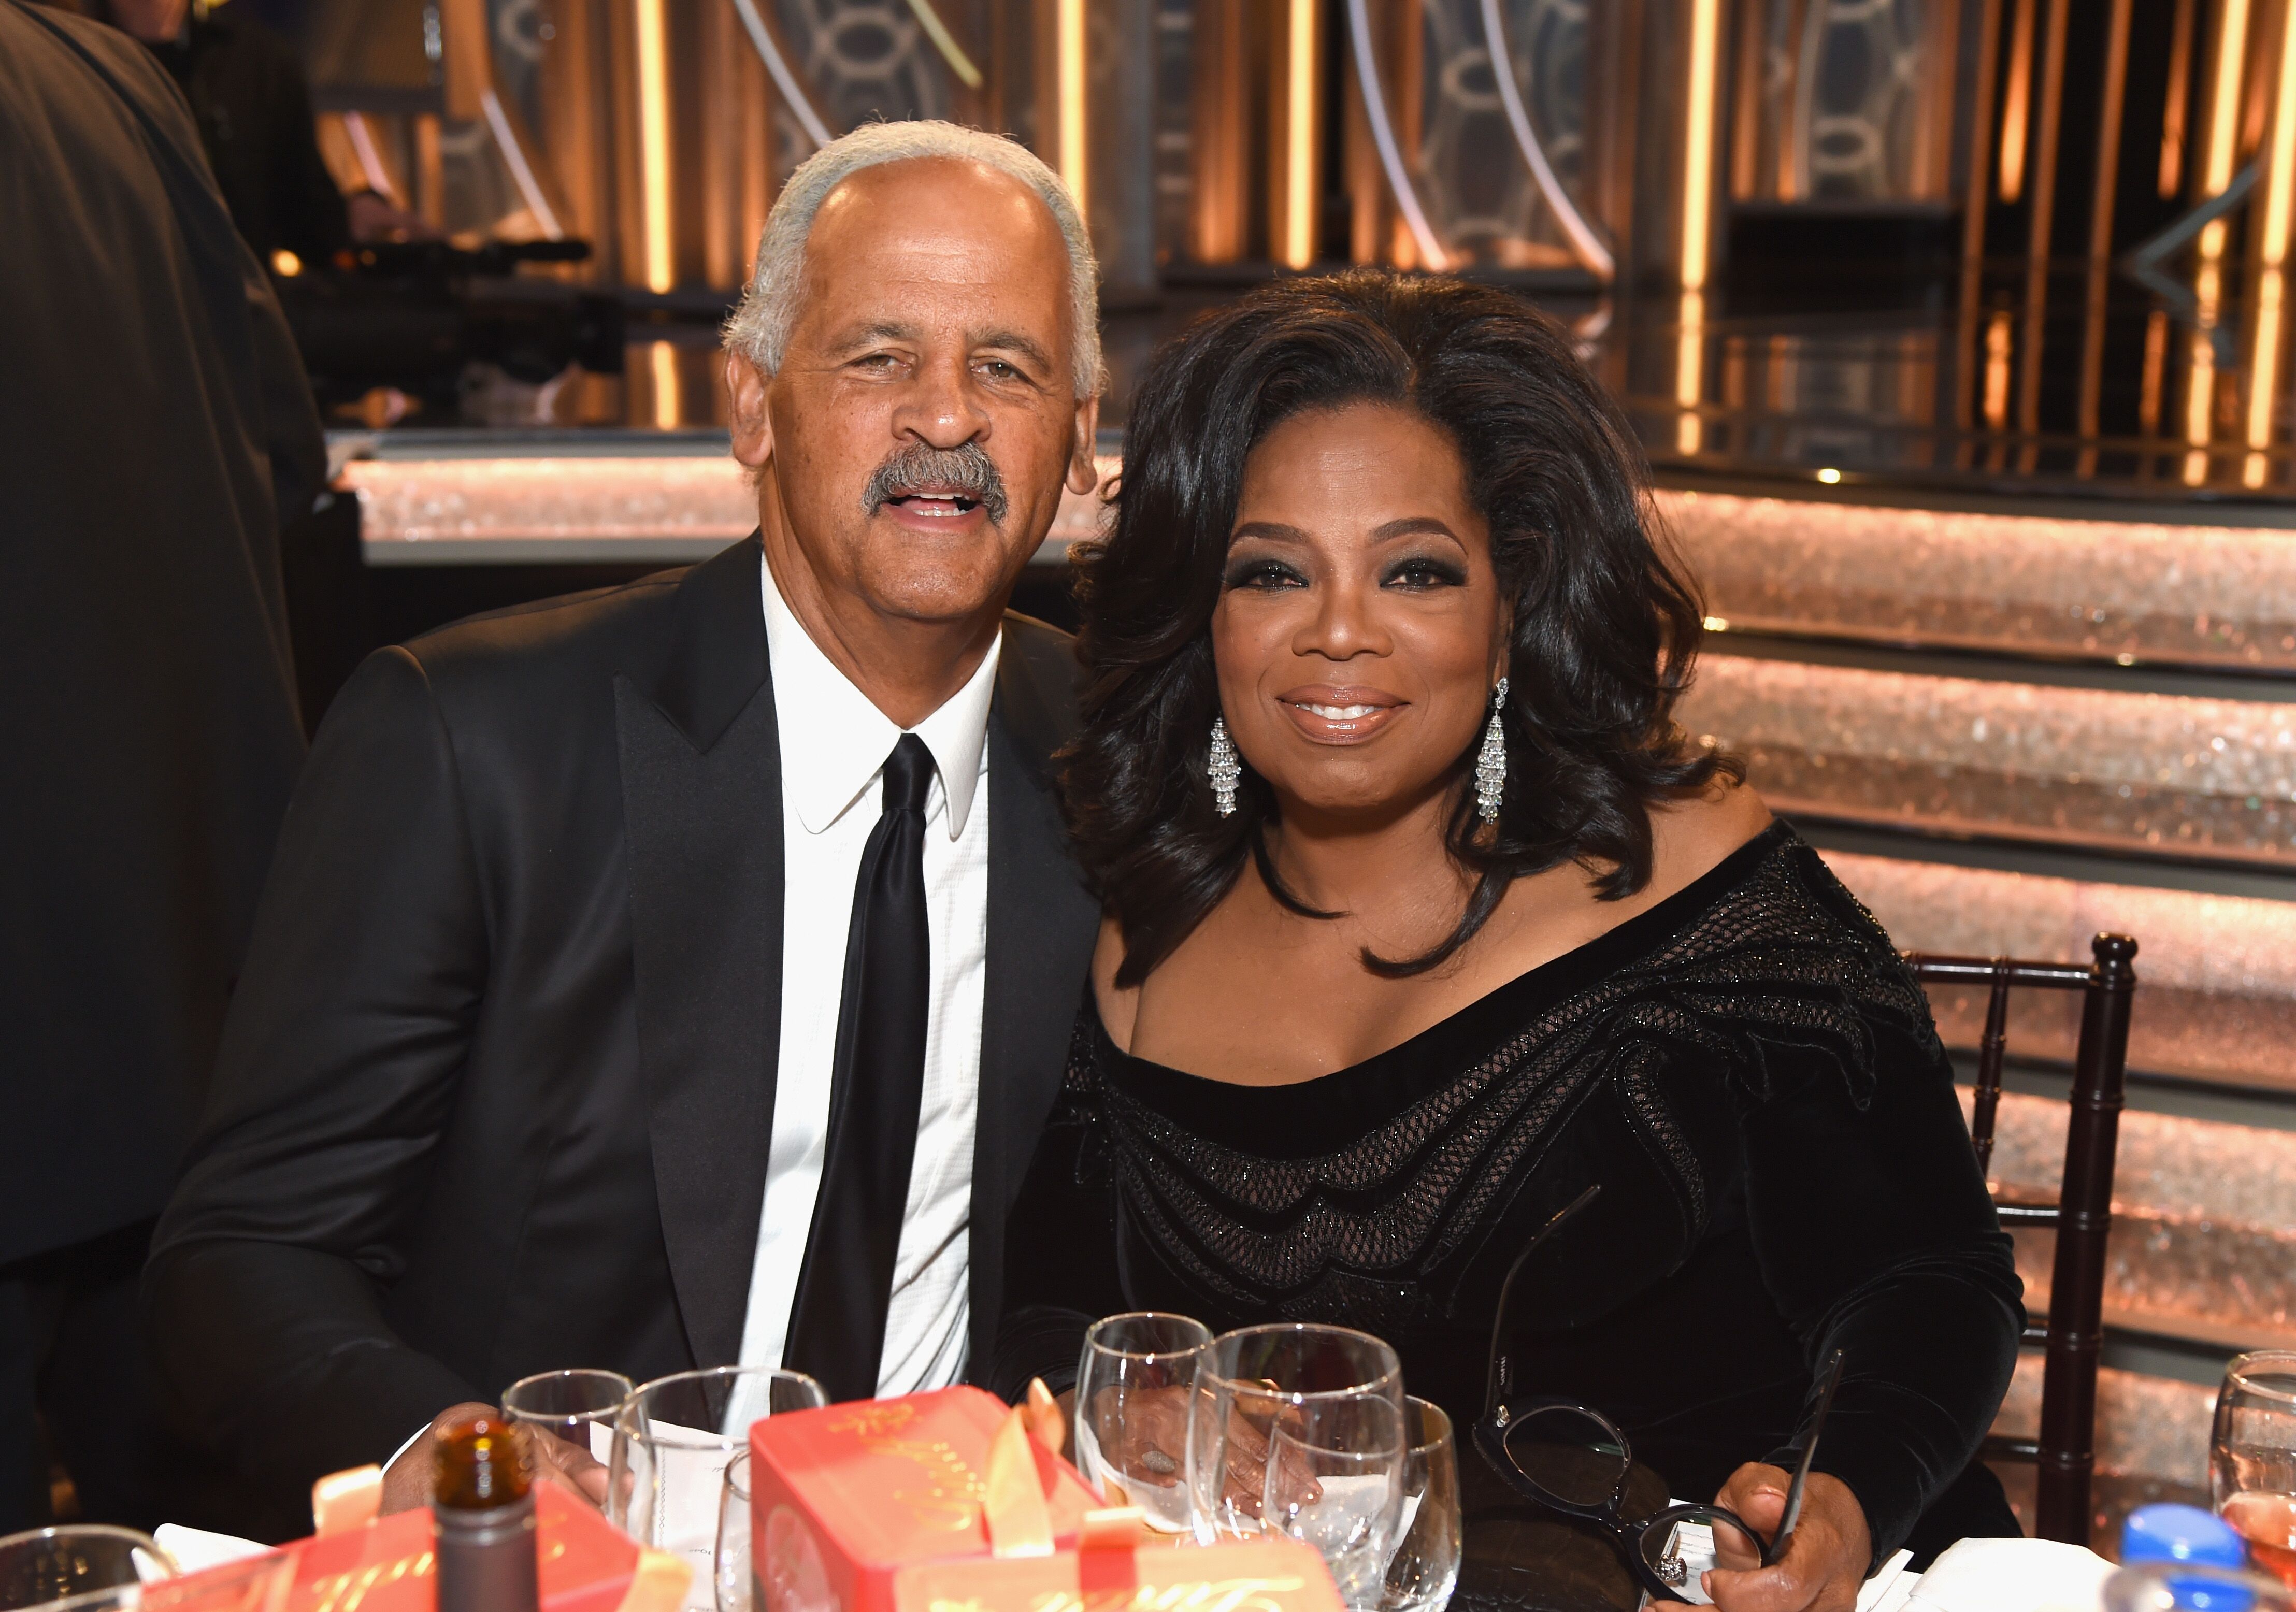  Stedman Graham and Oprah Winfrey celebrate the 75th Annual Golden Globe Awards at the Beverly Hilton Hotel/ Source: Getty Images